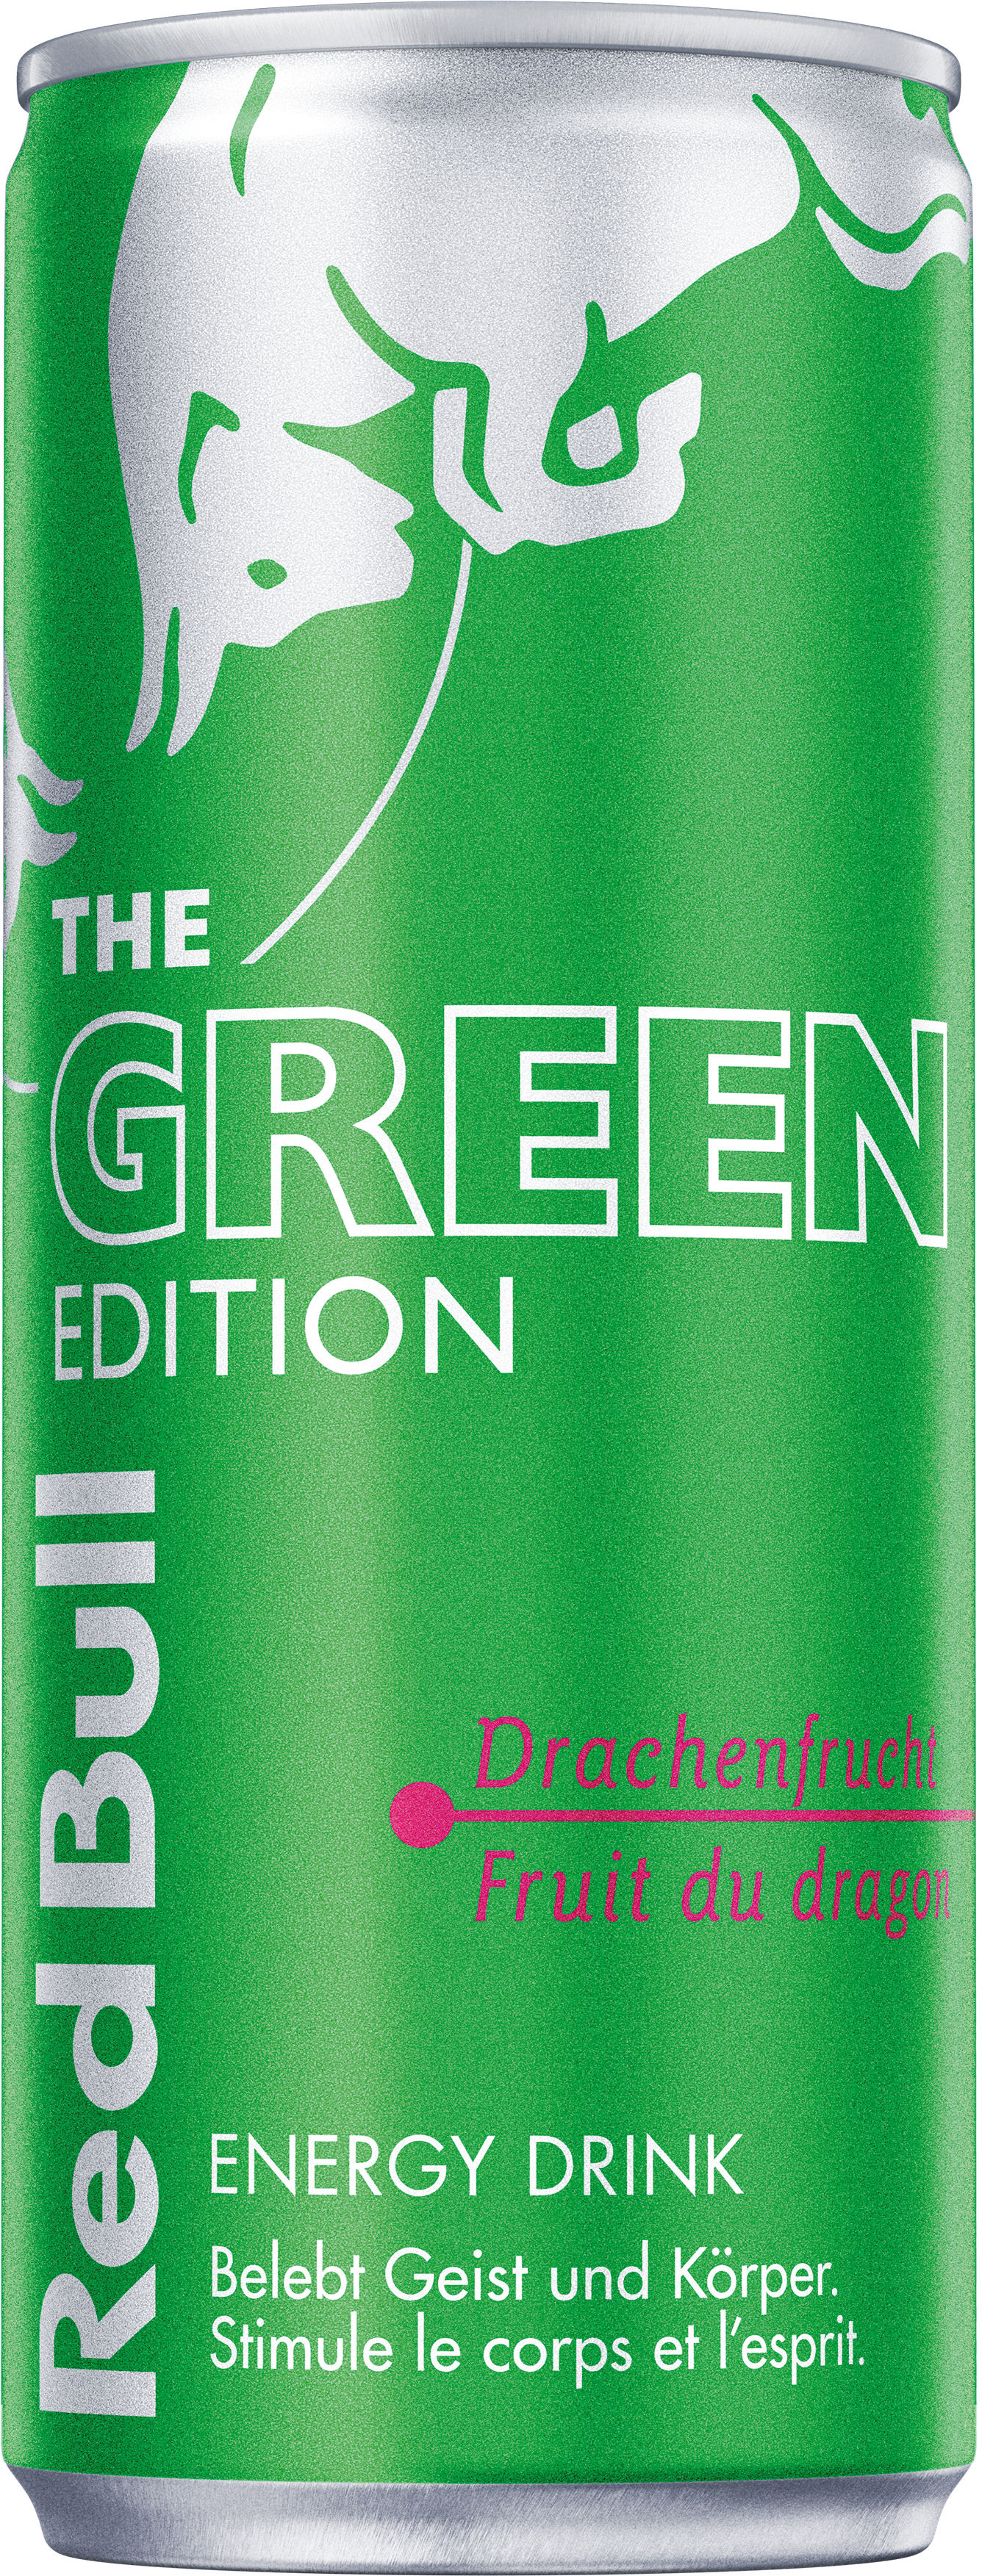 RED BULL Energy Drink Alu 6252 Green Edition 25 cl, 24 pcs.